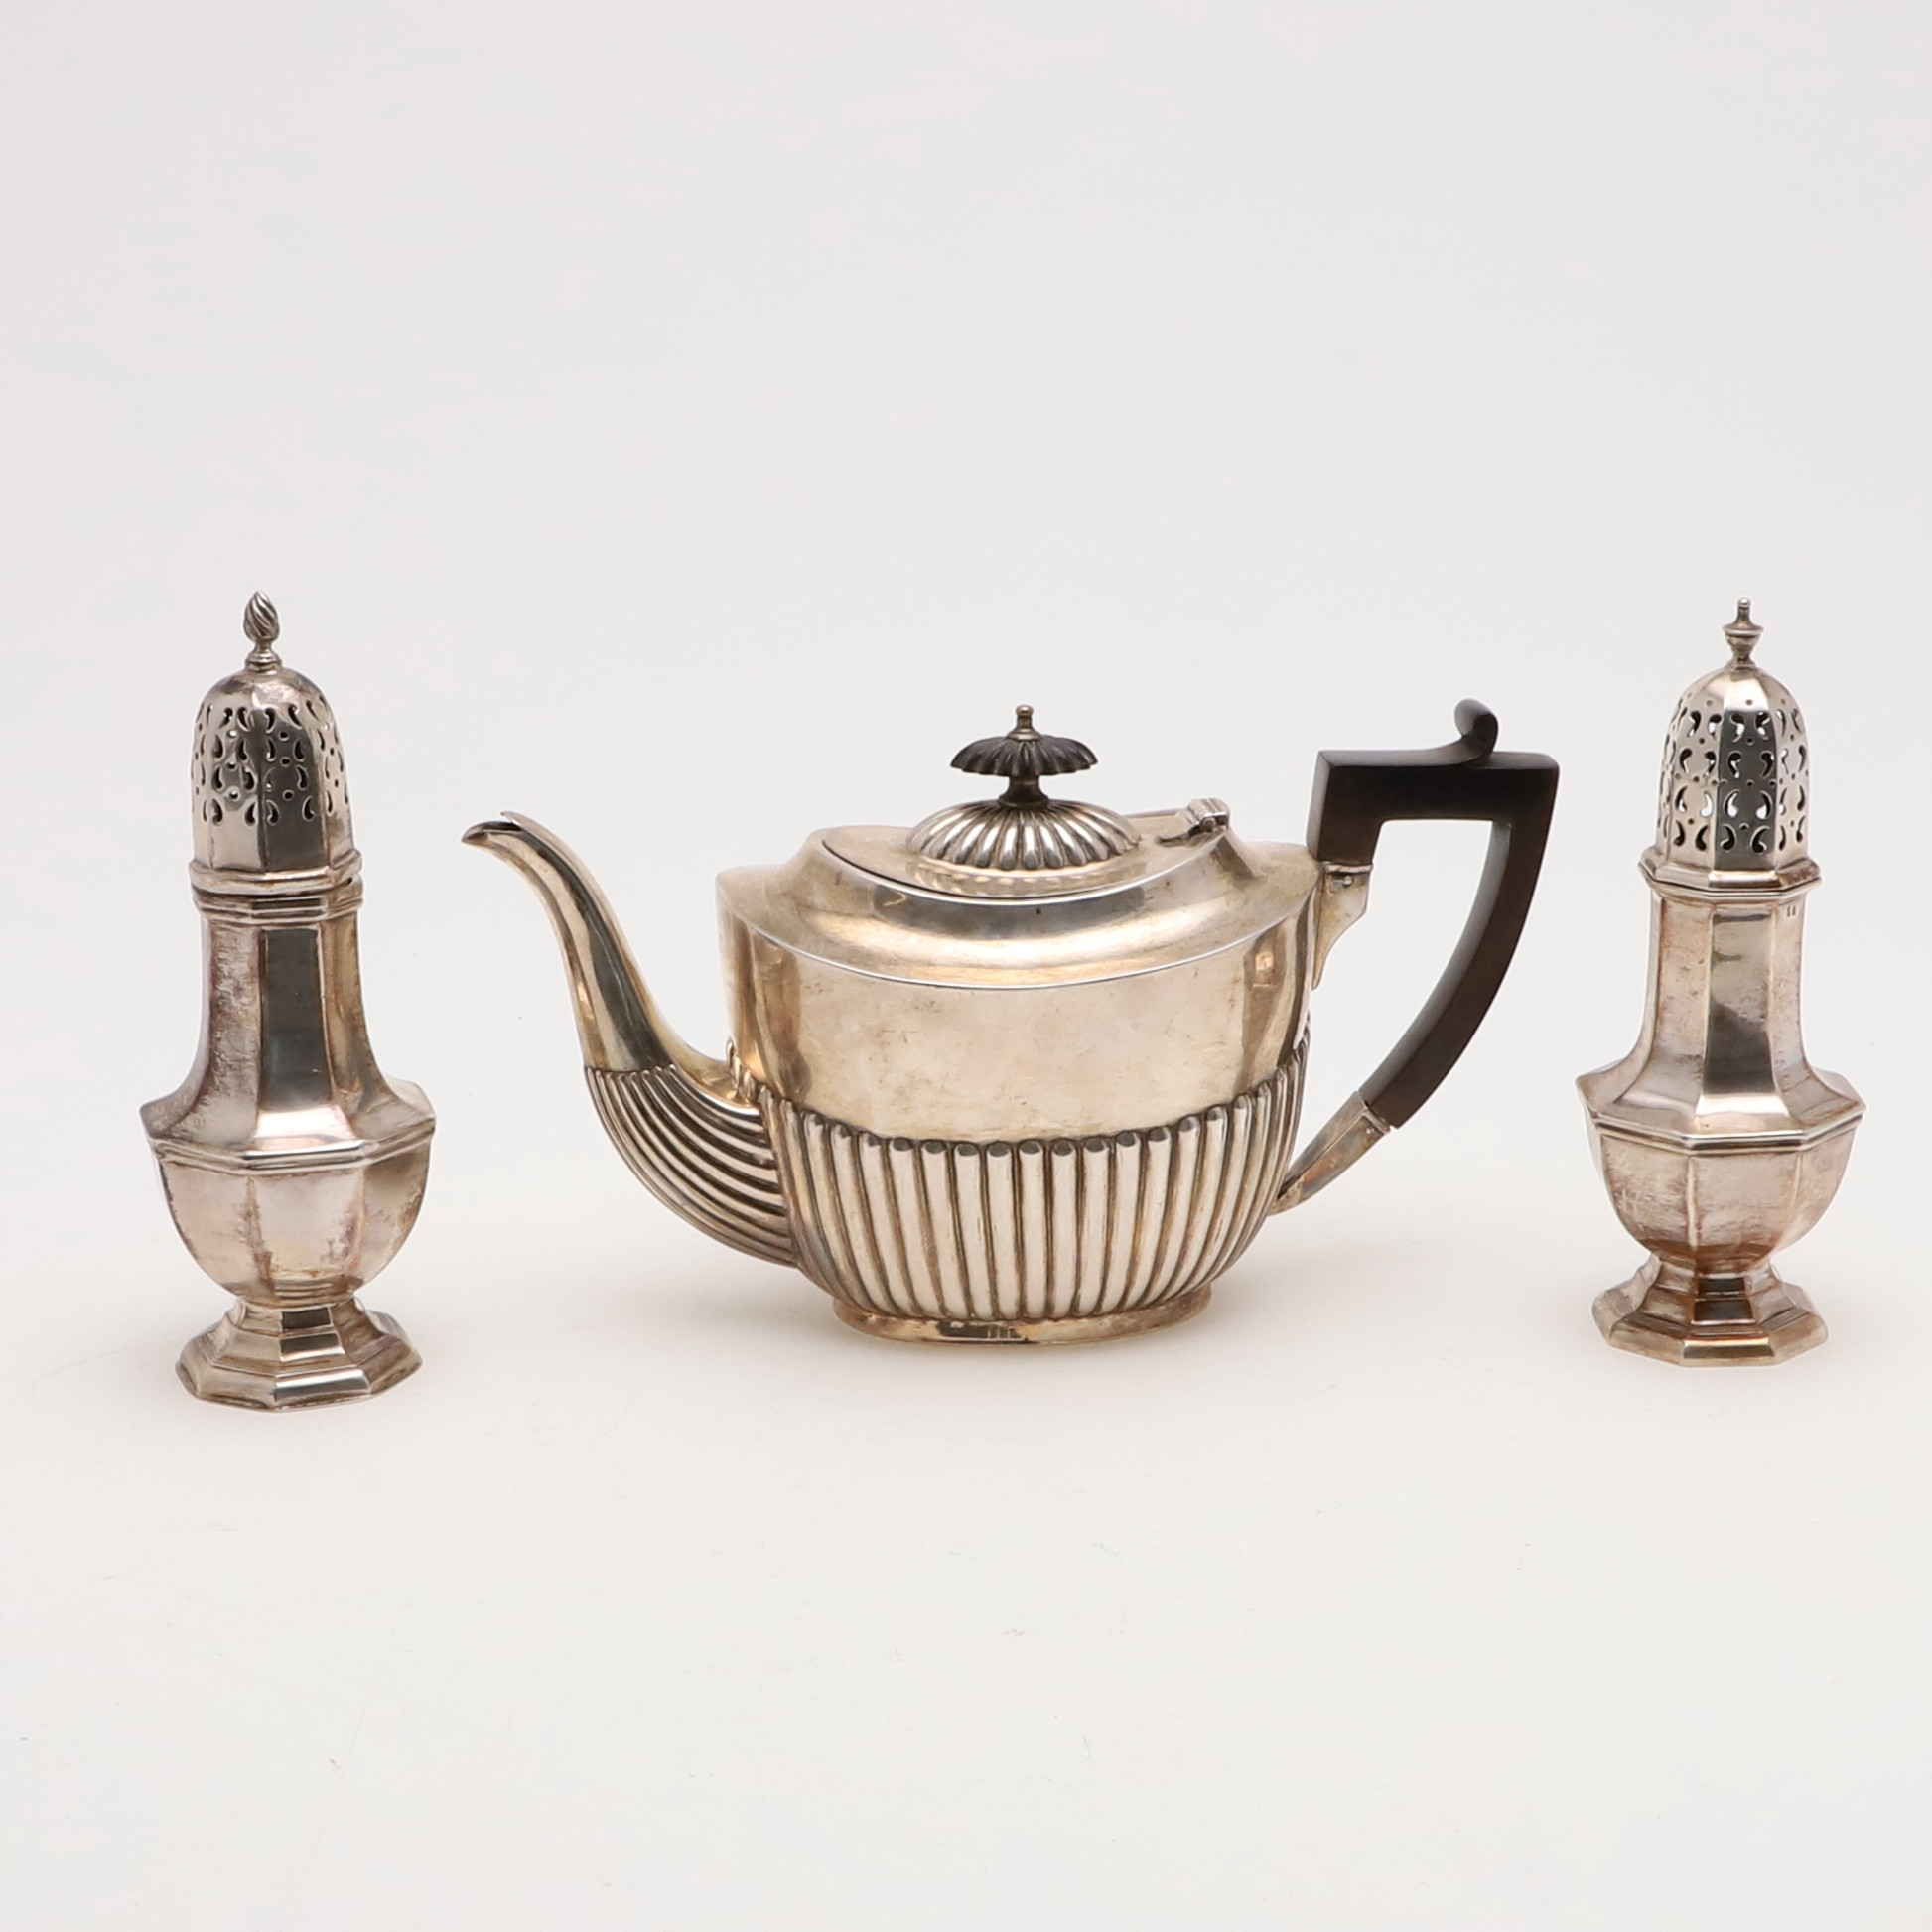 A LATE 19TH/ EARLY 20TH CENTURY TEAPOT.